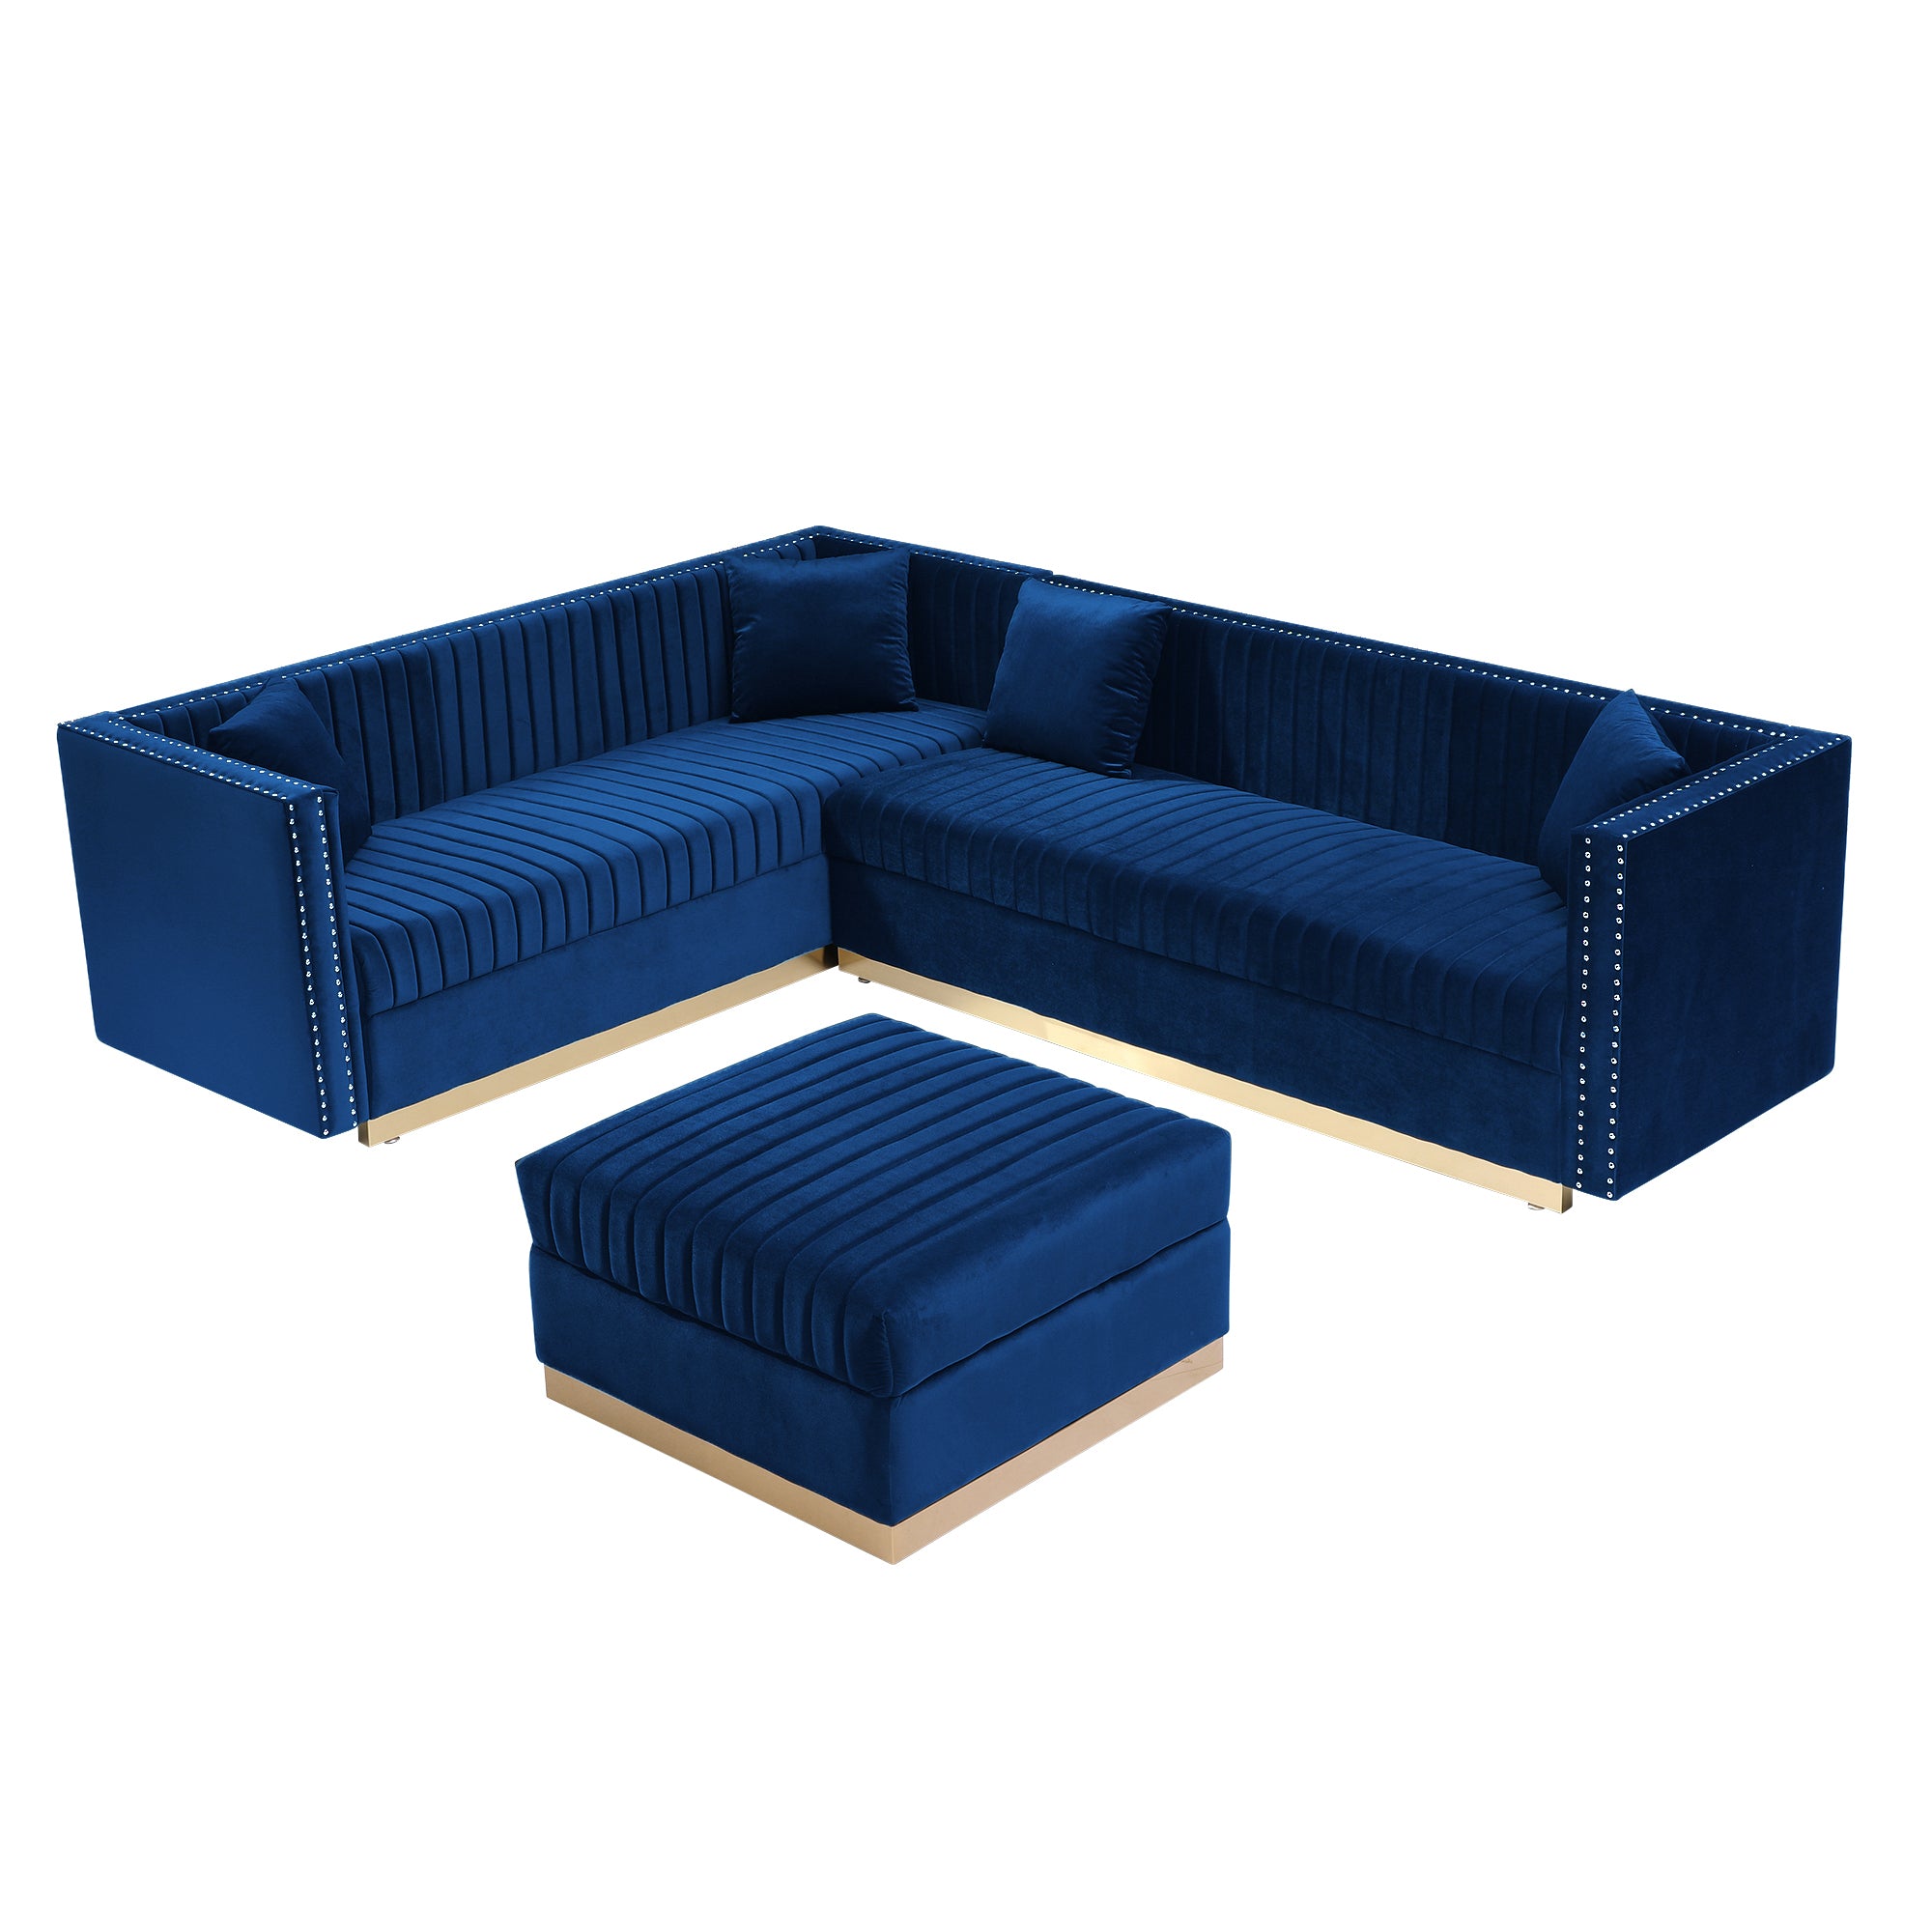 Milano Luxury Velvet Sectional With Ottoman, Vertical Channel Tufted with Gold Finish legs